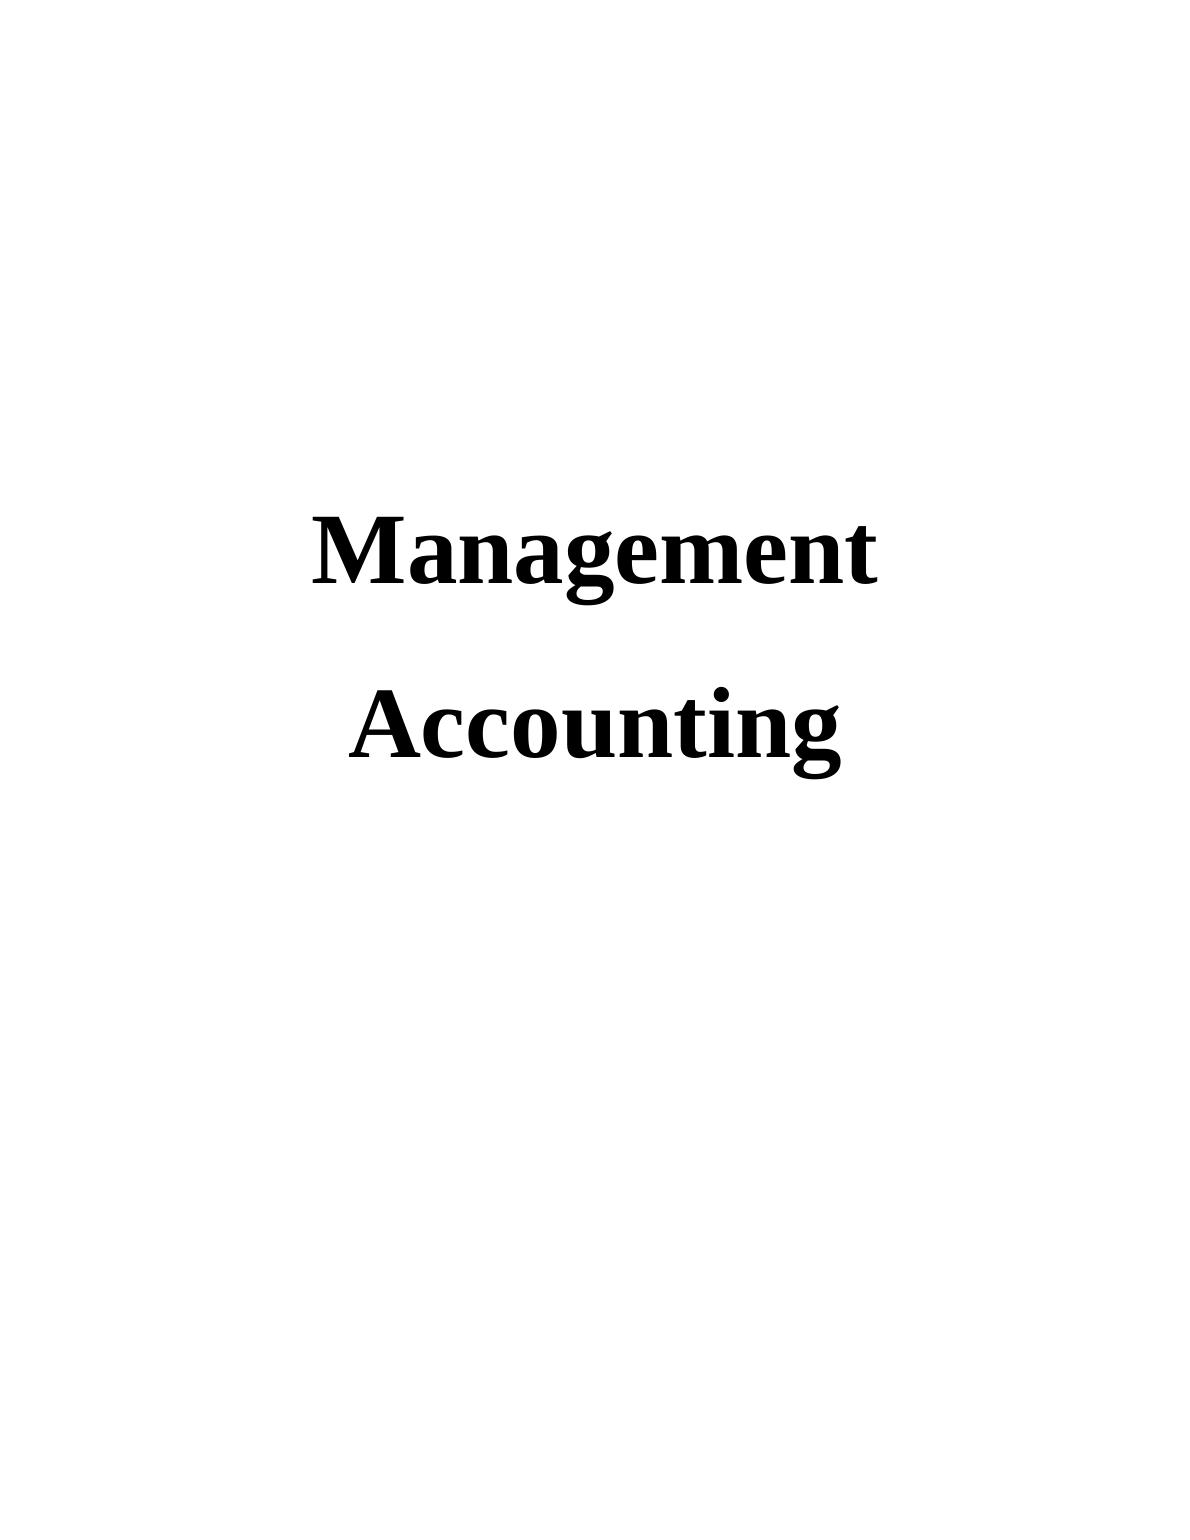 Management Accounting Techniques : Assignment_1